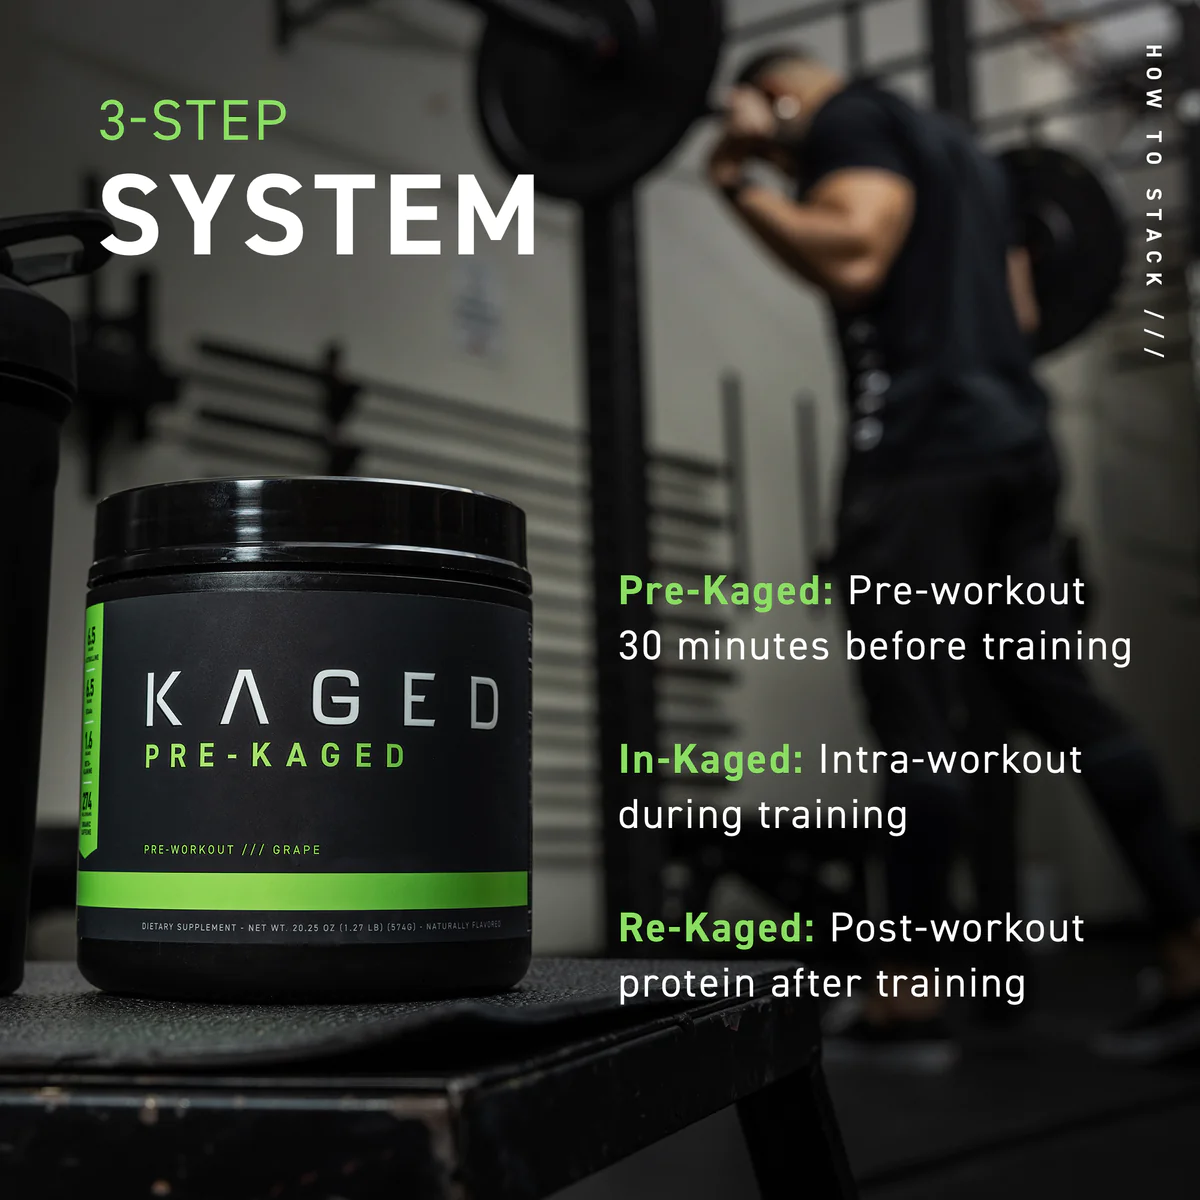 Pre-Kaged Elite - All-In-One Pre-Workout